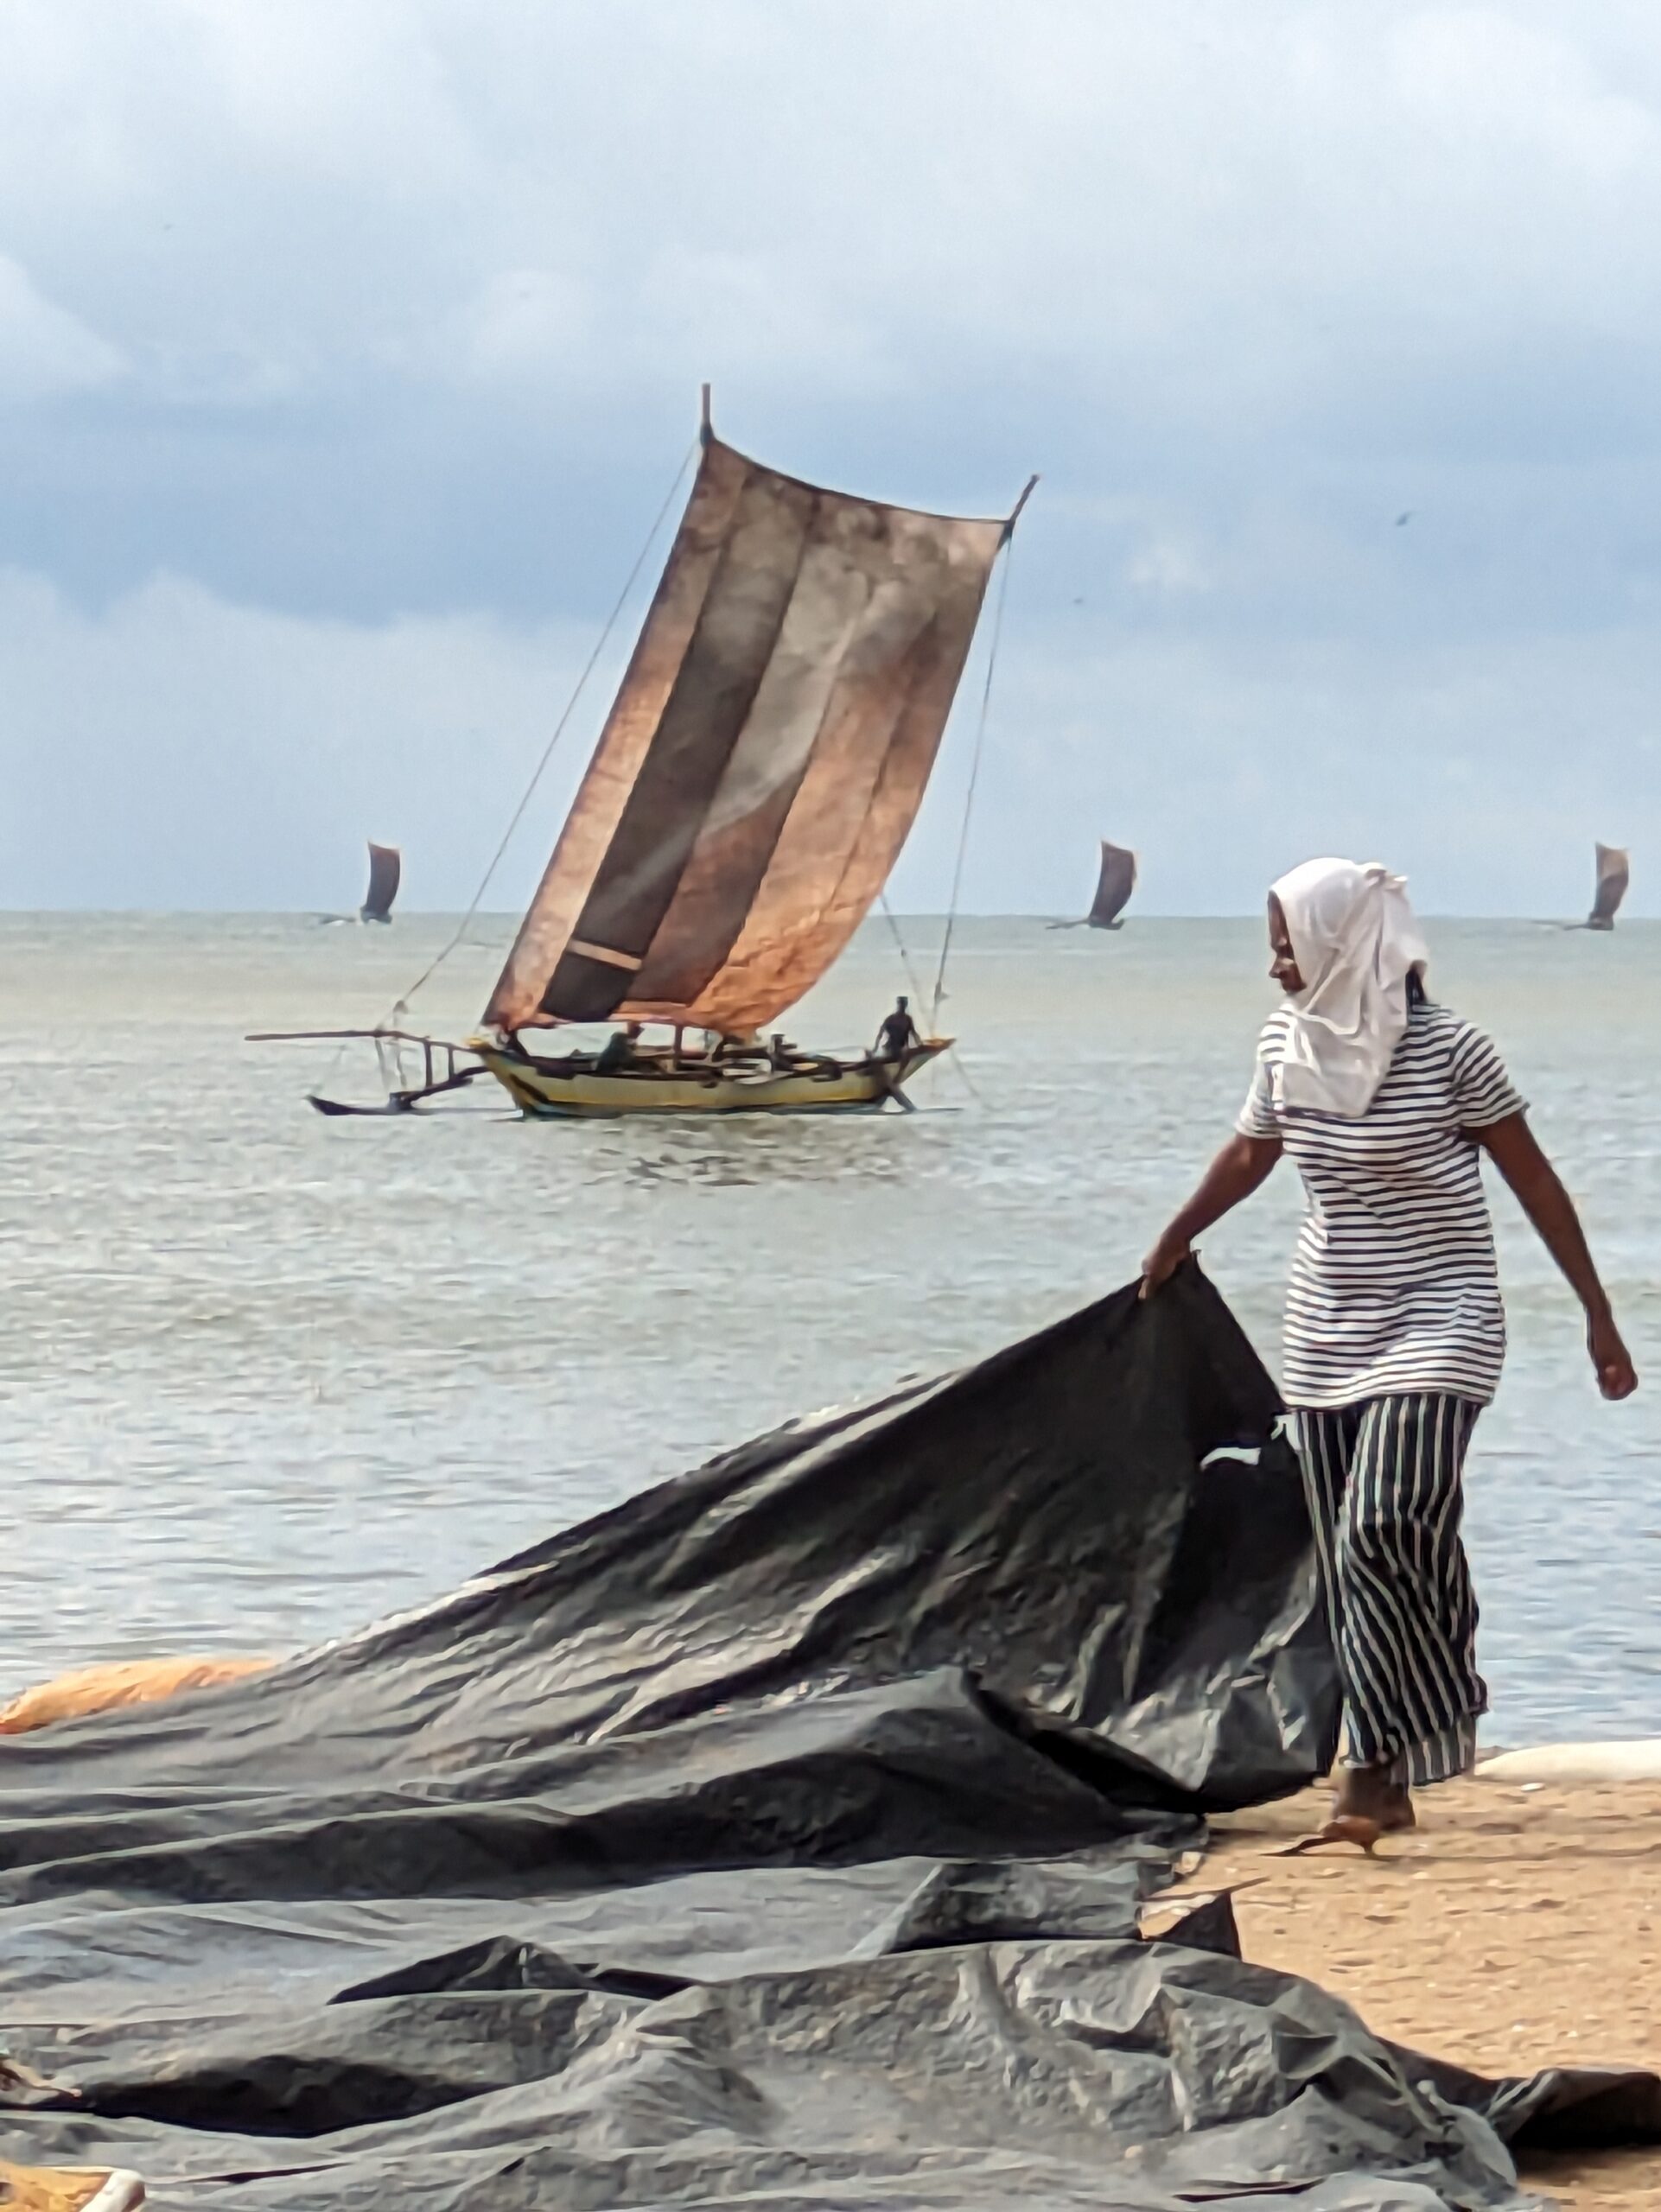 Woman in foreground folding black sheeting. One outrigger in centre. Three outriggers in the distance.